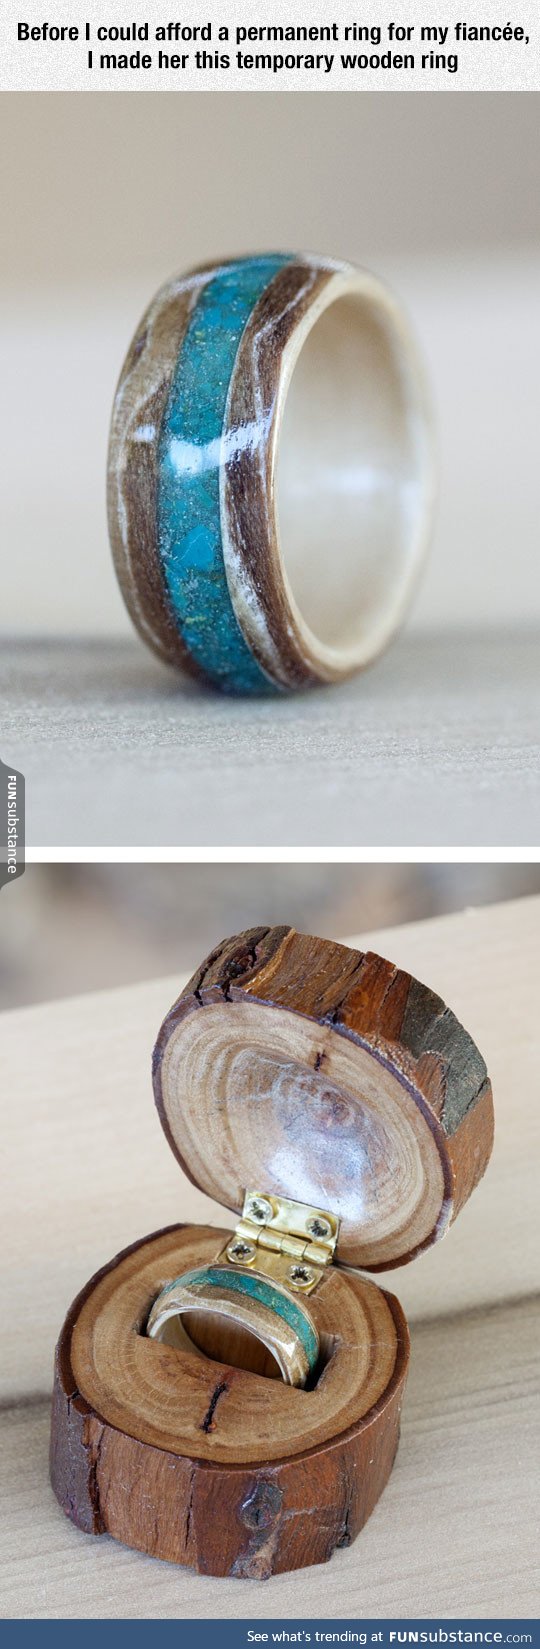 Ring carved out of wood in a wooden box